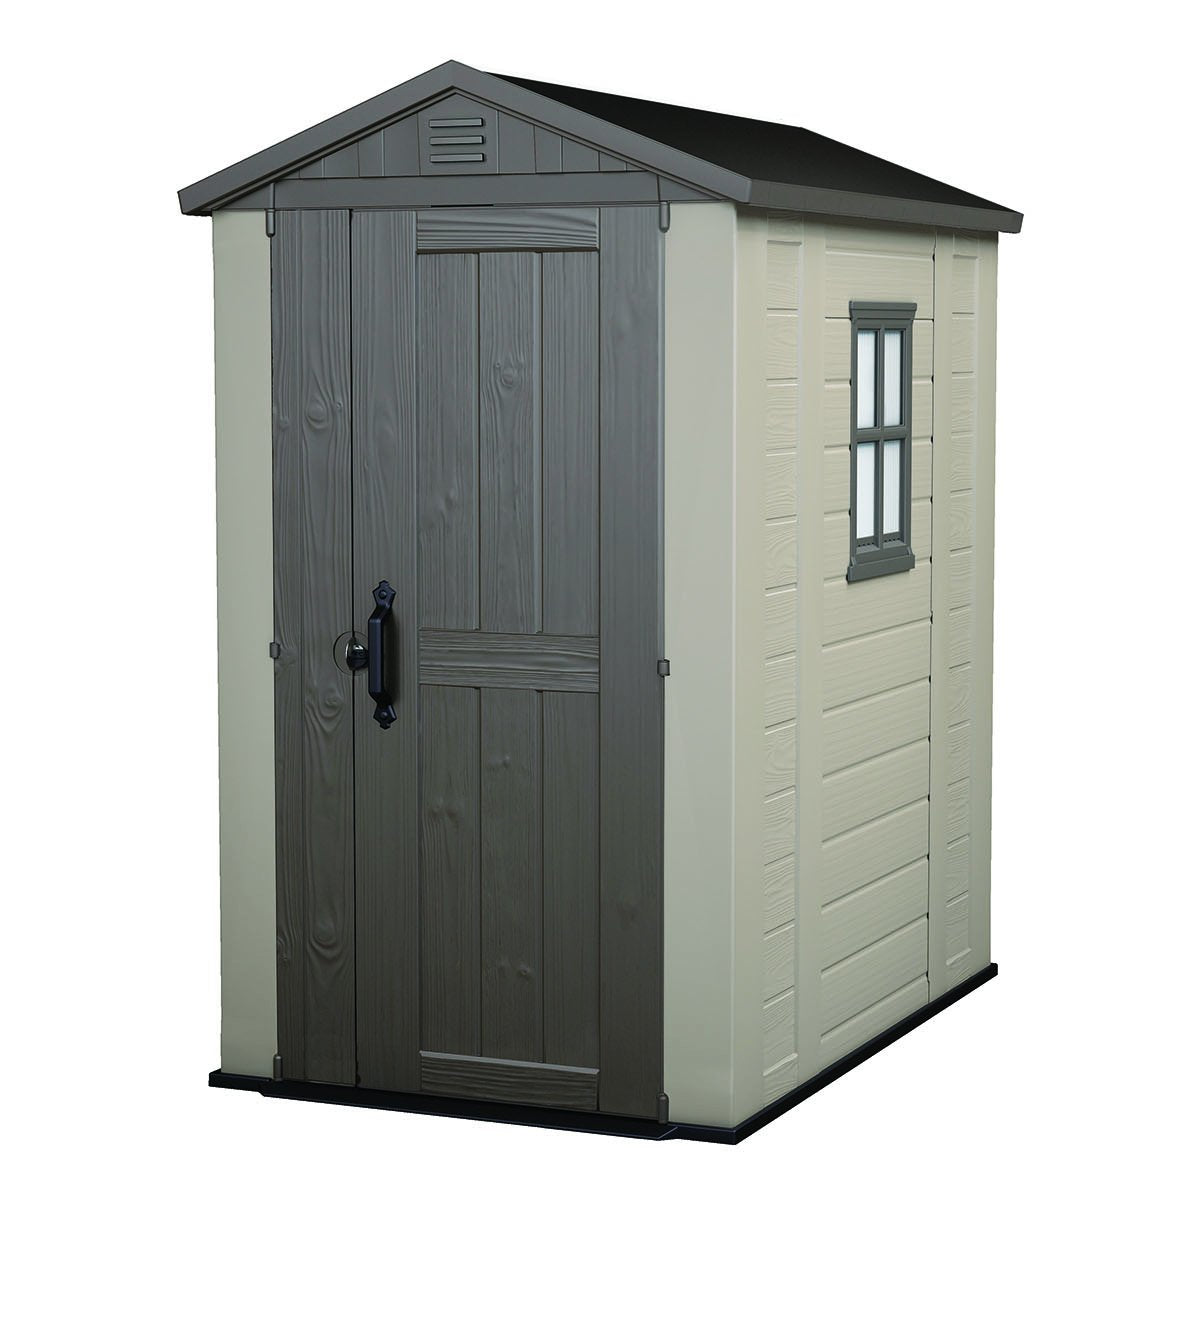 Keter Factor 4x6 Outdoor Storage Shed Kit-Perfect to Store Patio Furniture, Garden Tools, Bike Accessories, Beach Chairs and Push Lawn Mower